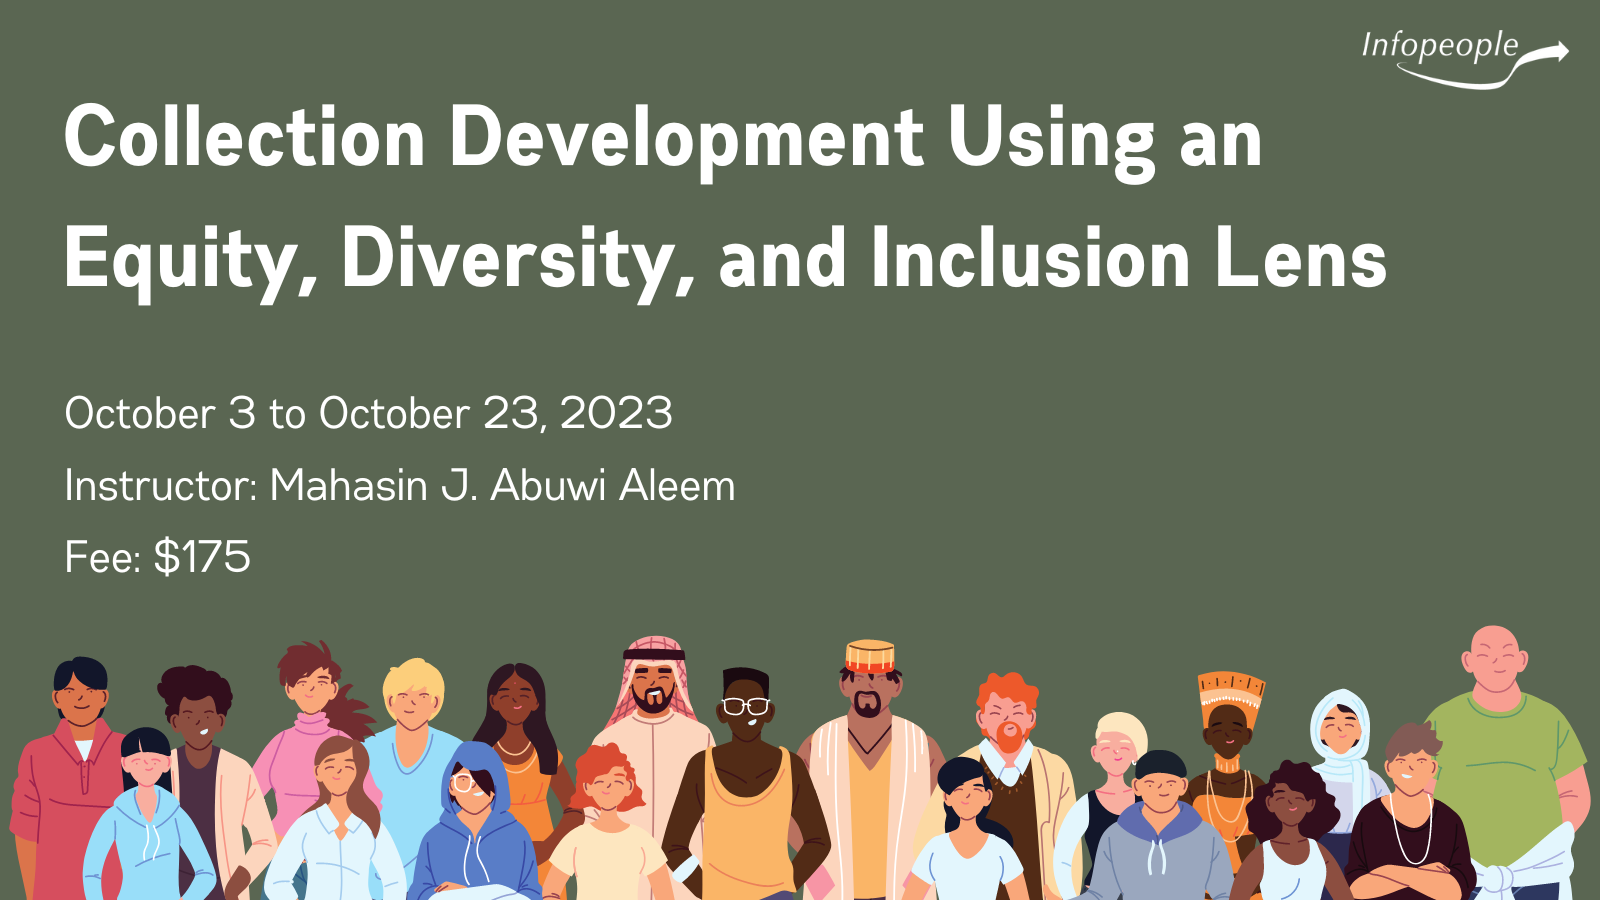 Collection Development Using an Equity, Diversity, and Inclusion Lens, an Infopeople course. October 3 to October 23, 2023. Instructor: Mahasin J. Abuwi Aleem. Fee: $175. The bottom of the image features illustrations of a diverse group of people.